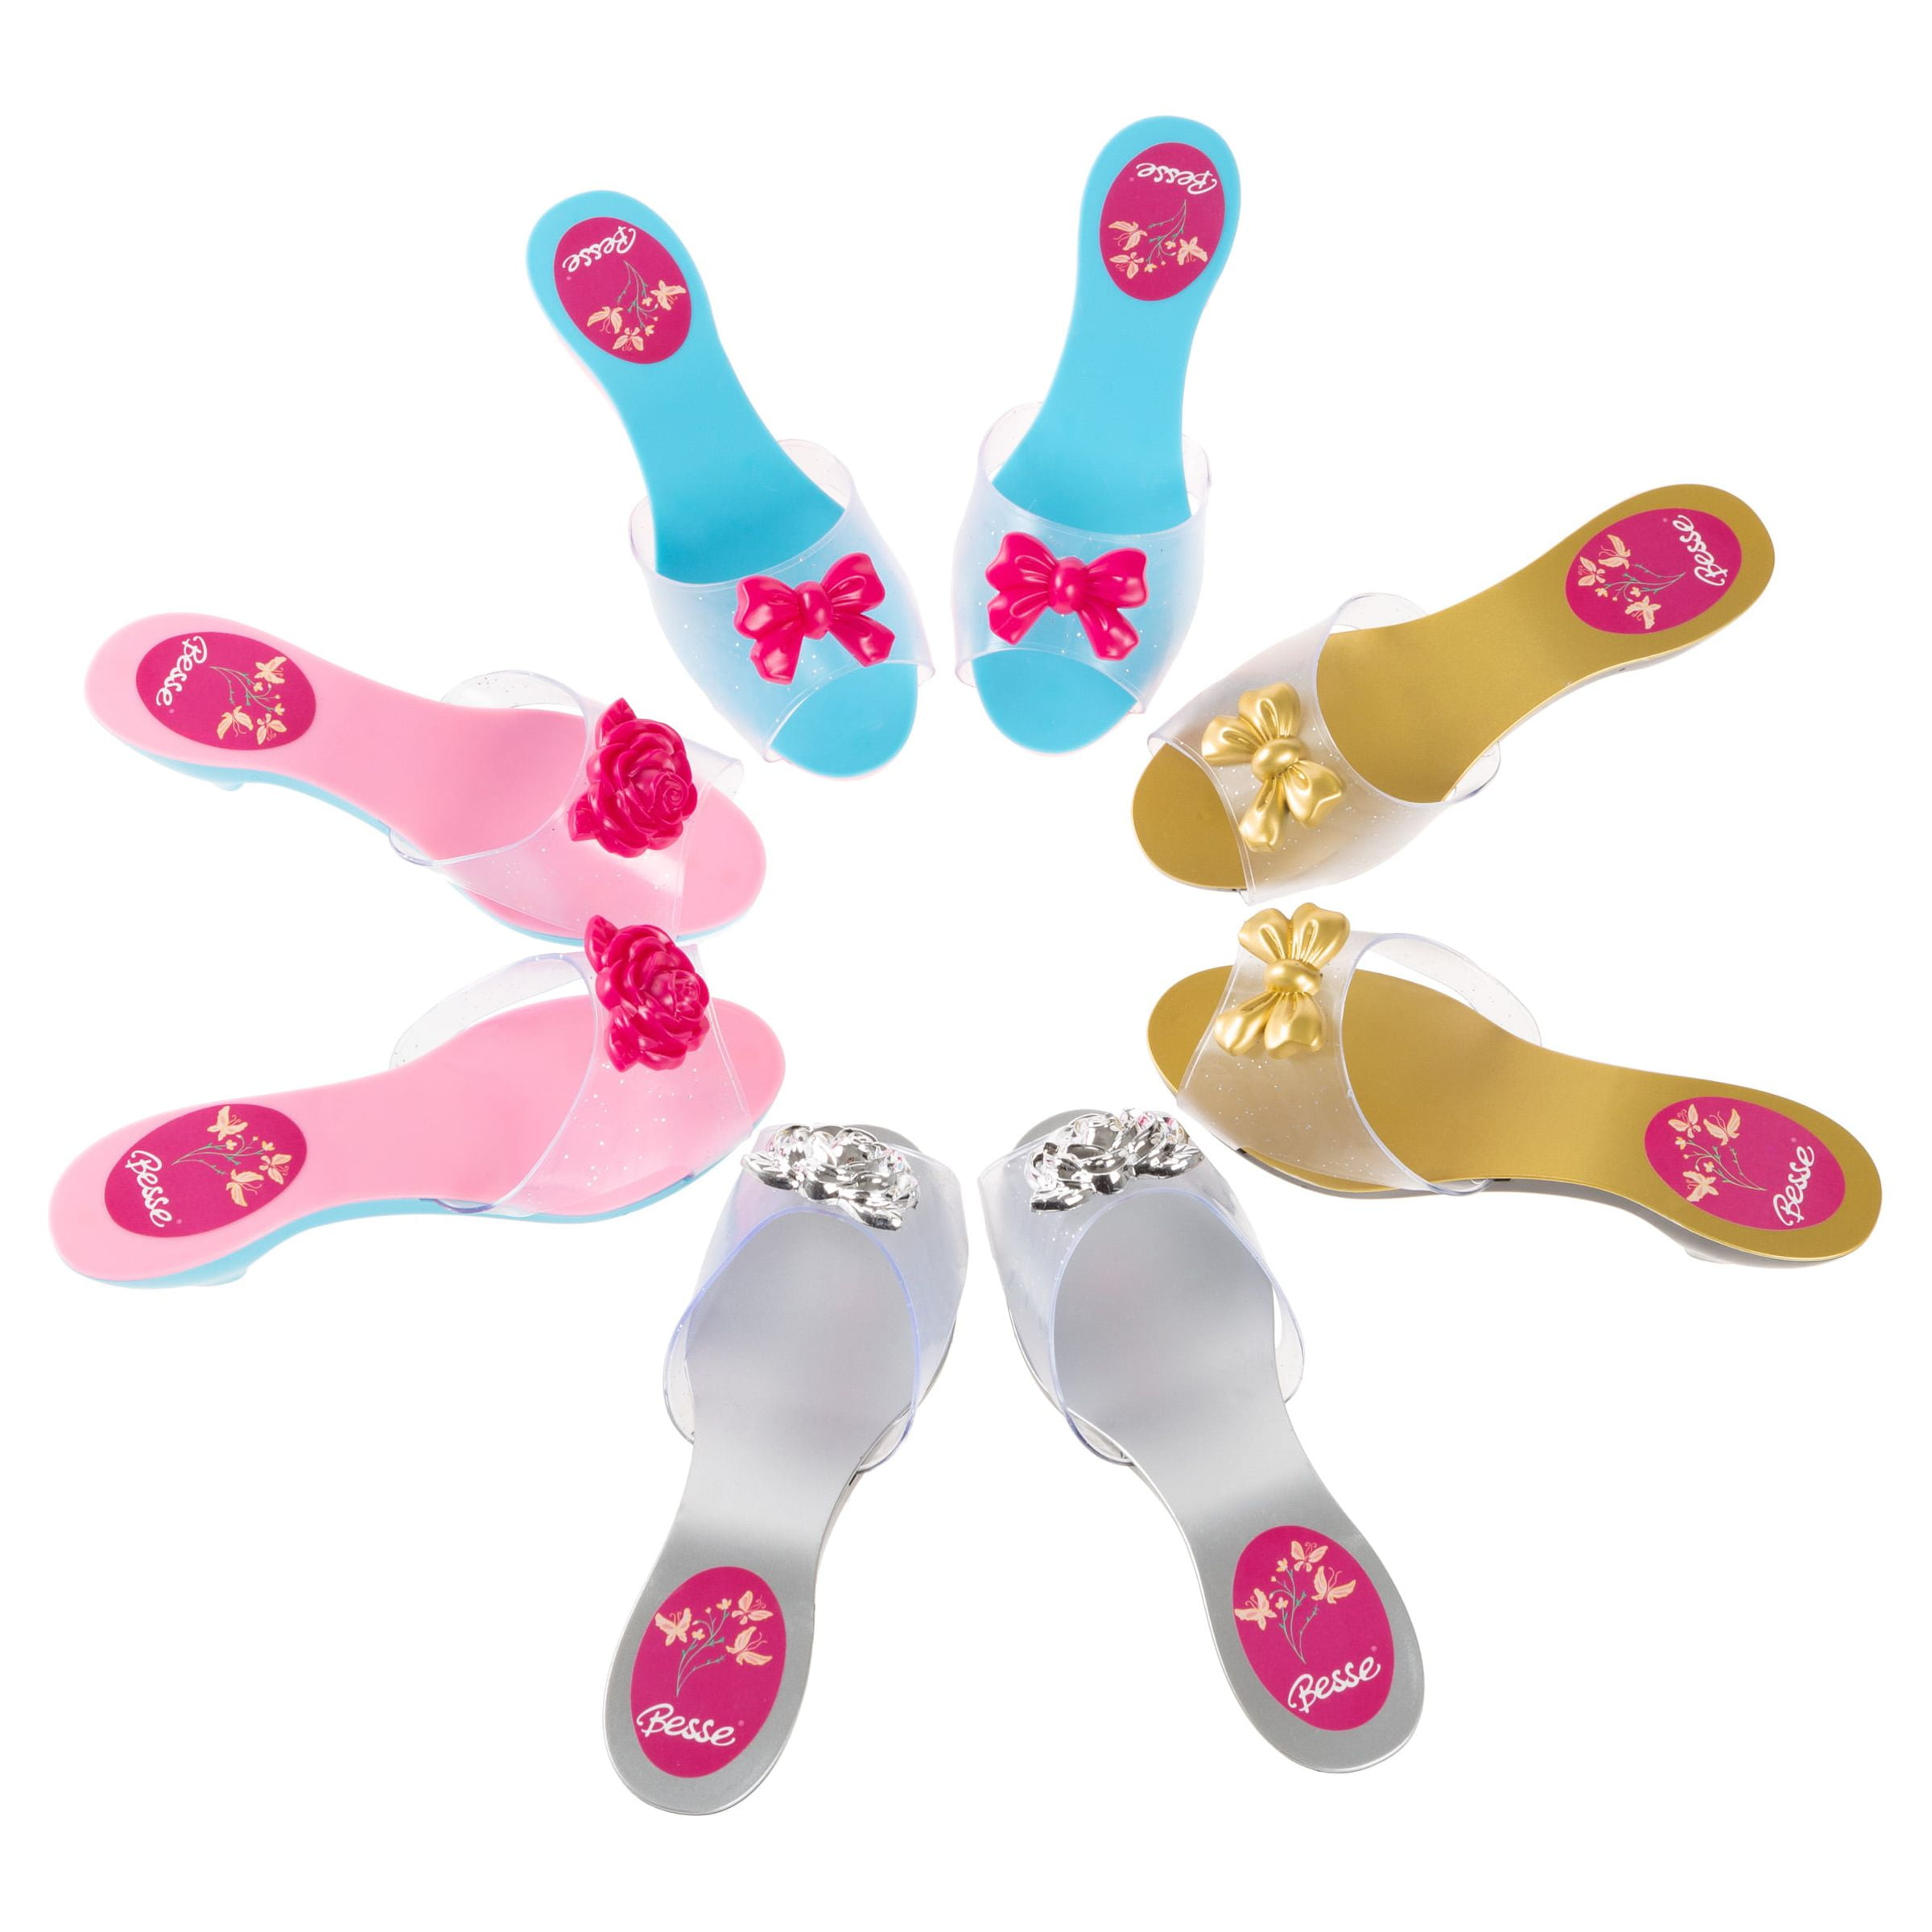 Plastic Dress Up High Heels reviews in Toys (Baby & Toddler) - ChickAdvisor